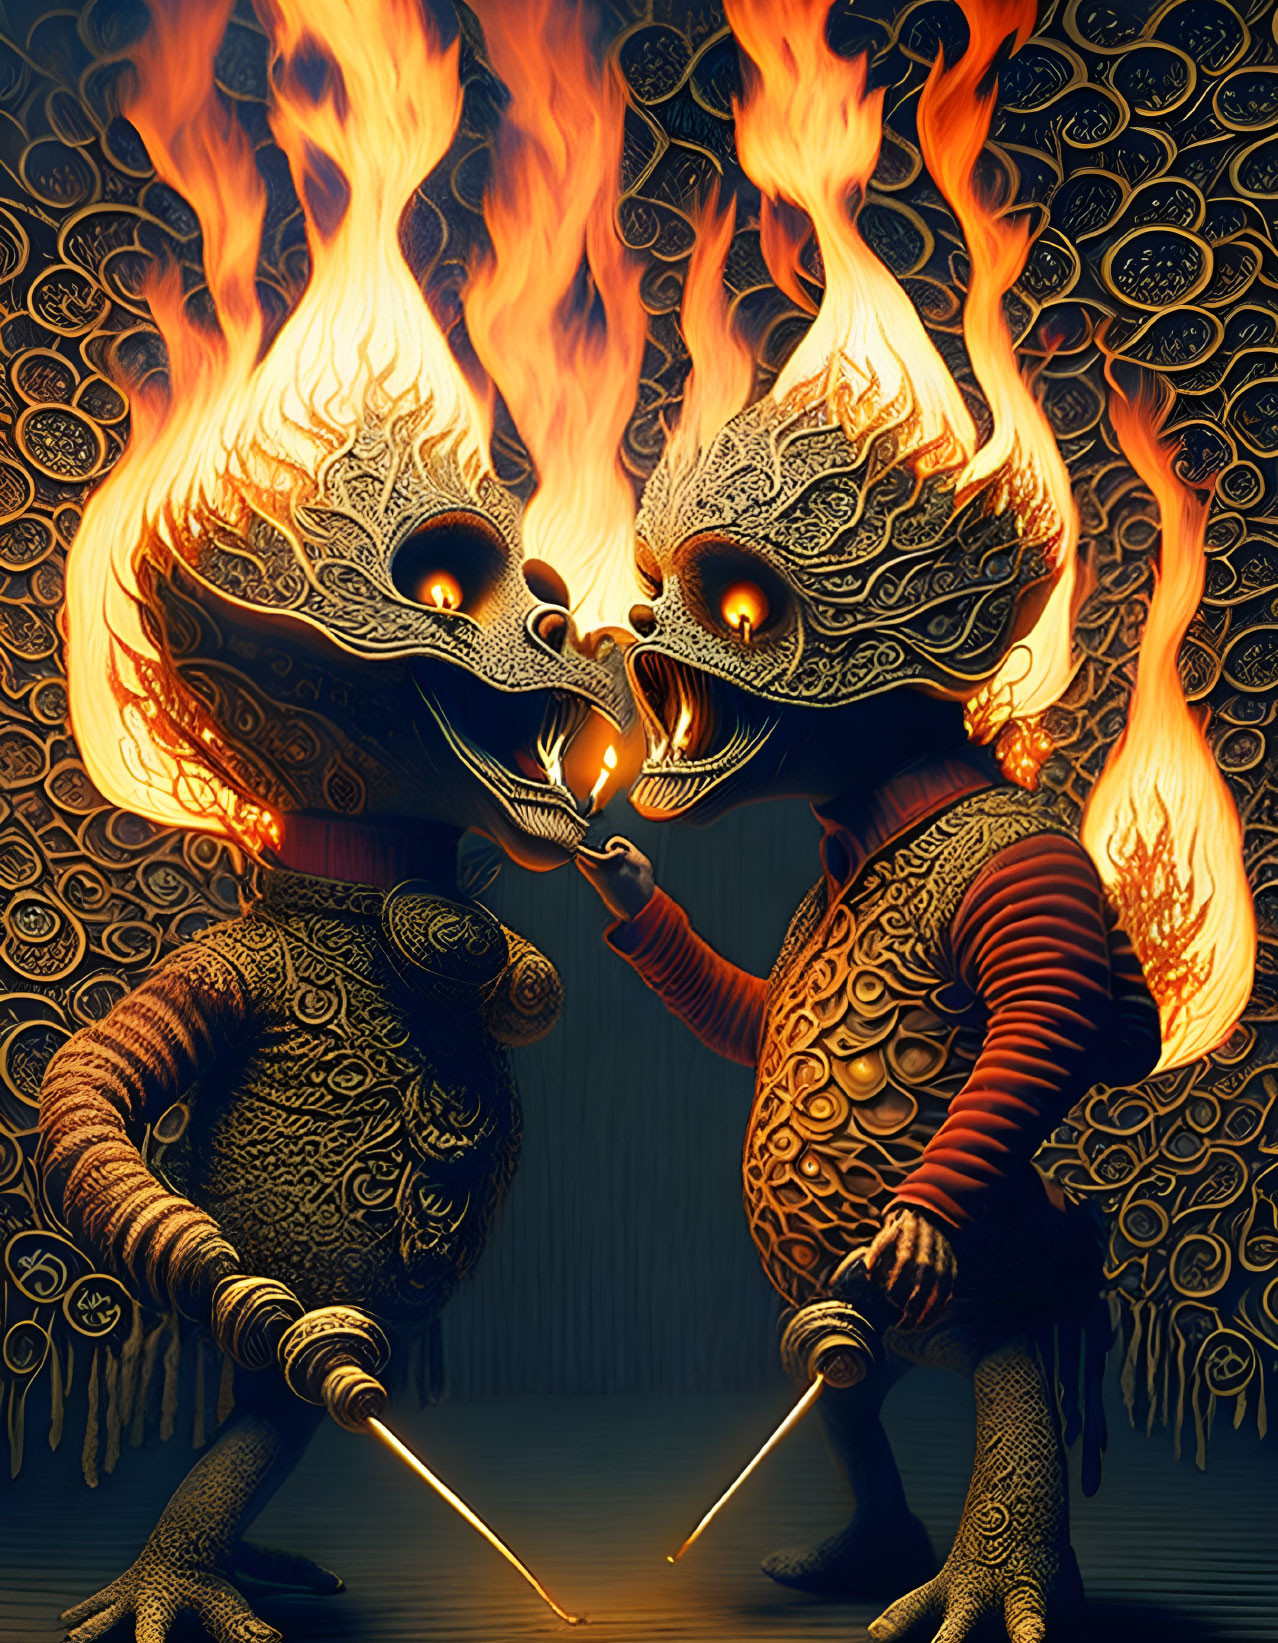 Fantastical creatures in ornate fiery masks duel with torches